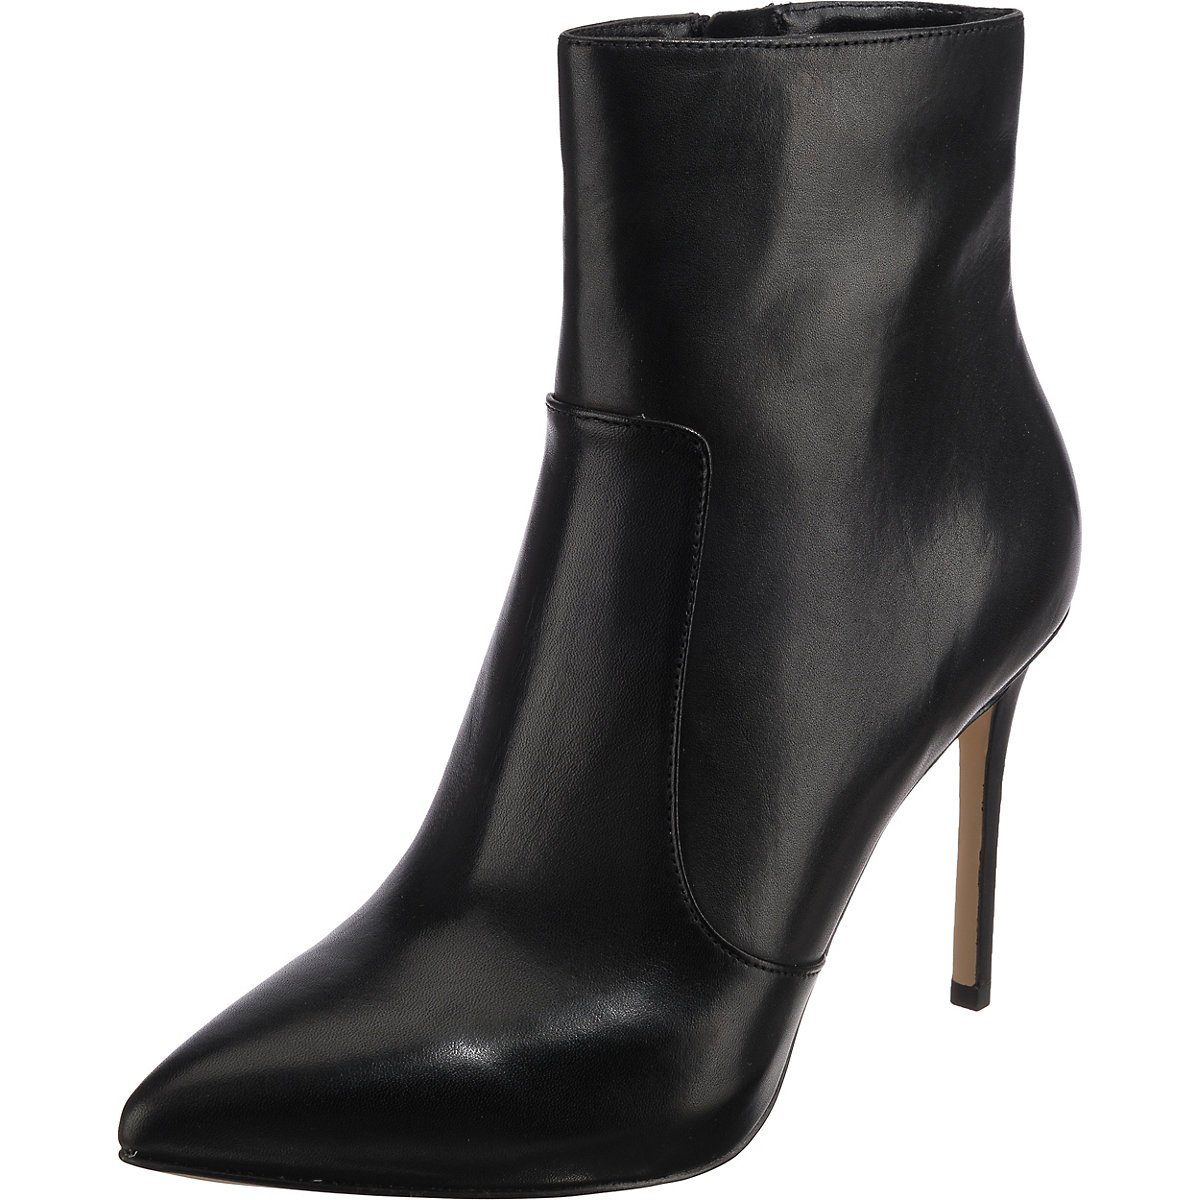 MICHAEL KORS Rue Stiletto Bootie Ankle Boots Ankleboots